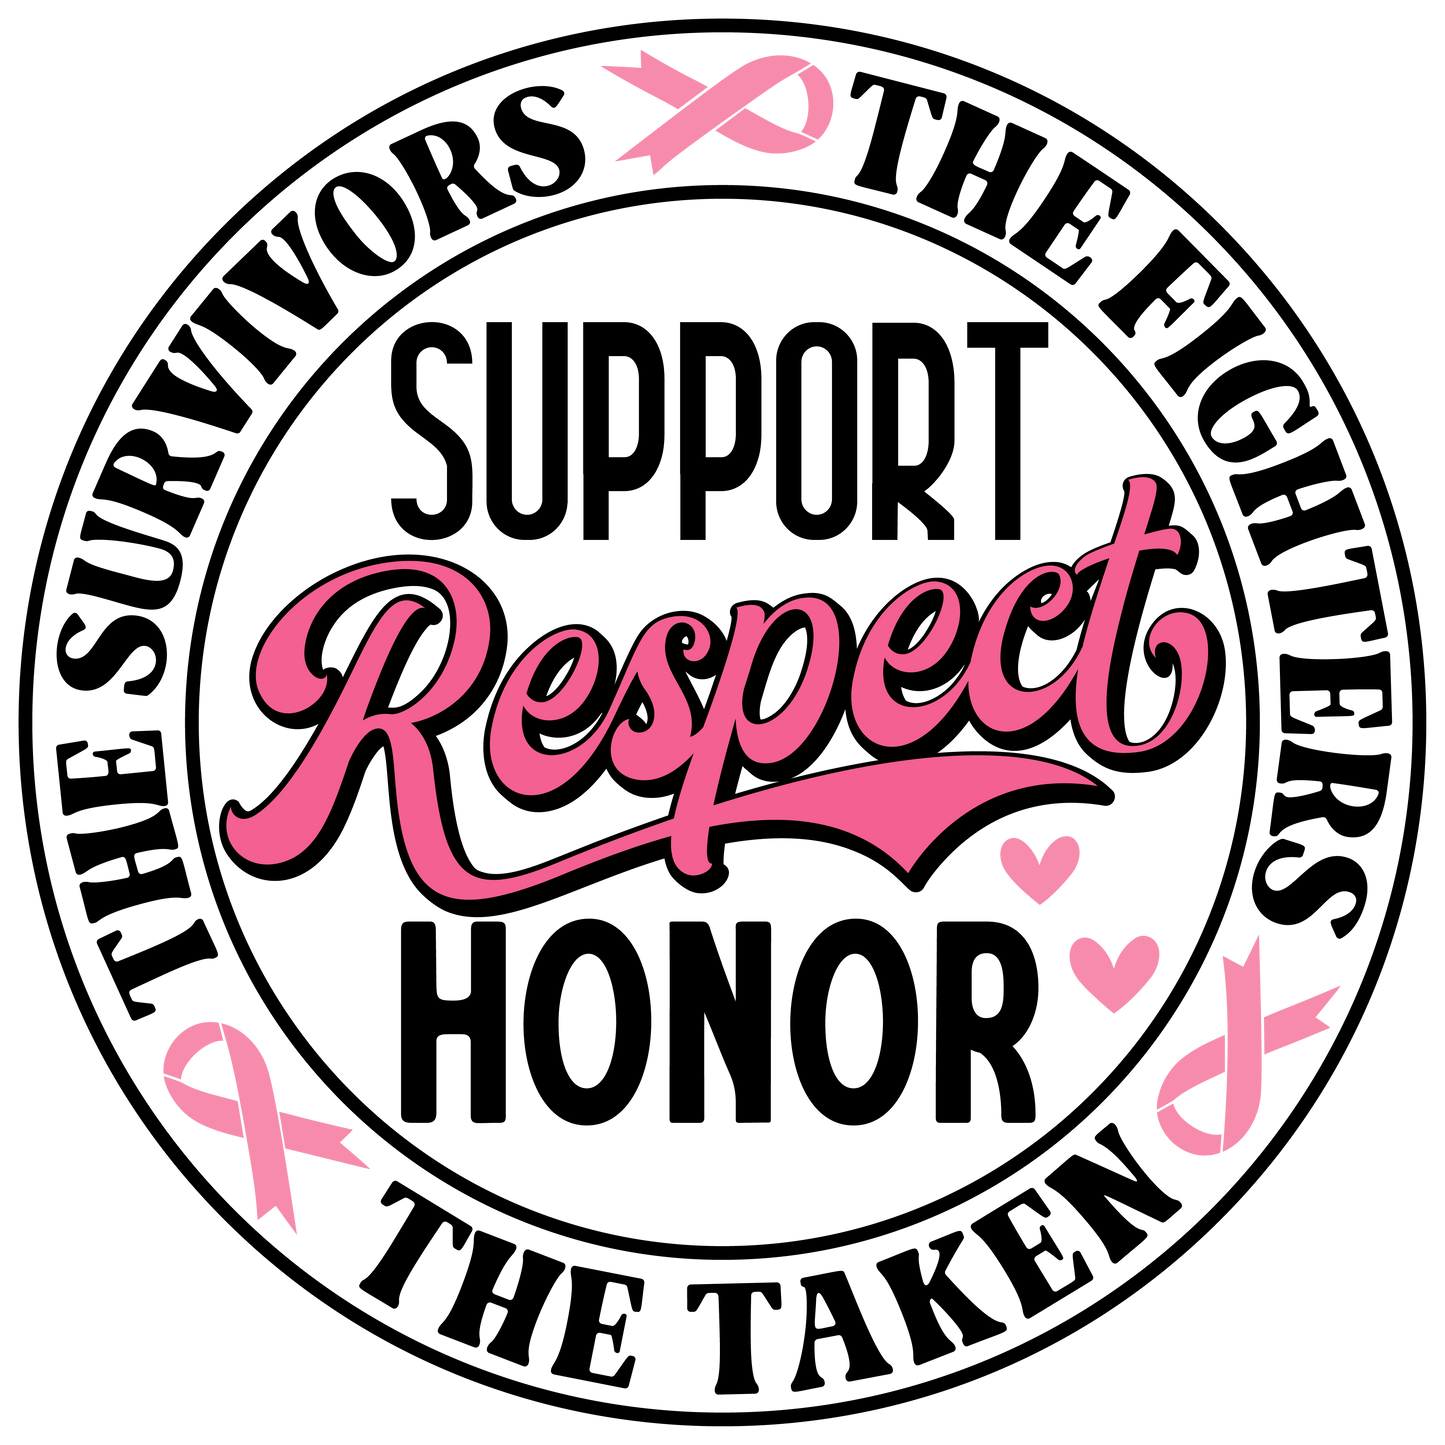 BREAST CANCER- SUPPORT, RESPECT, HONOR